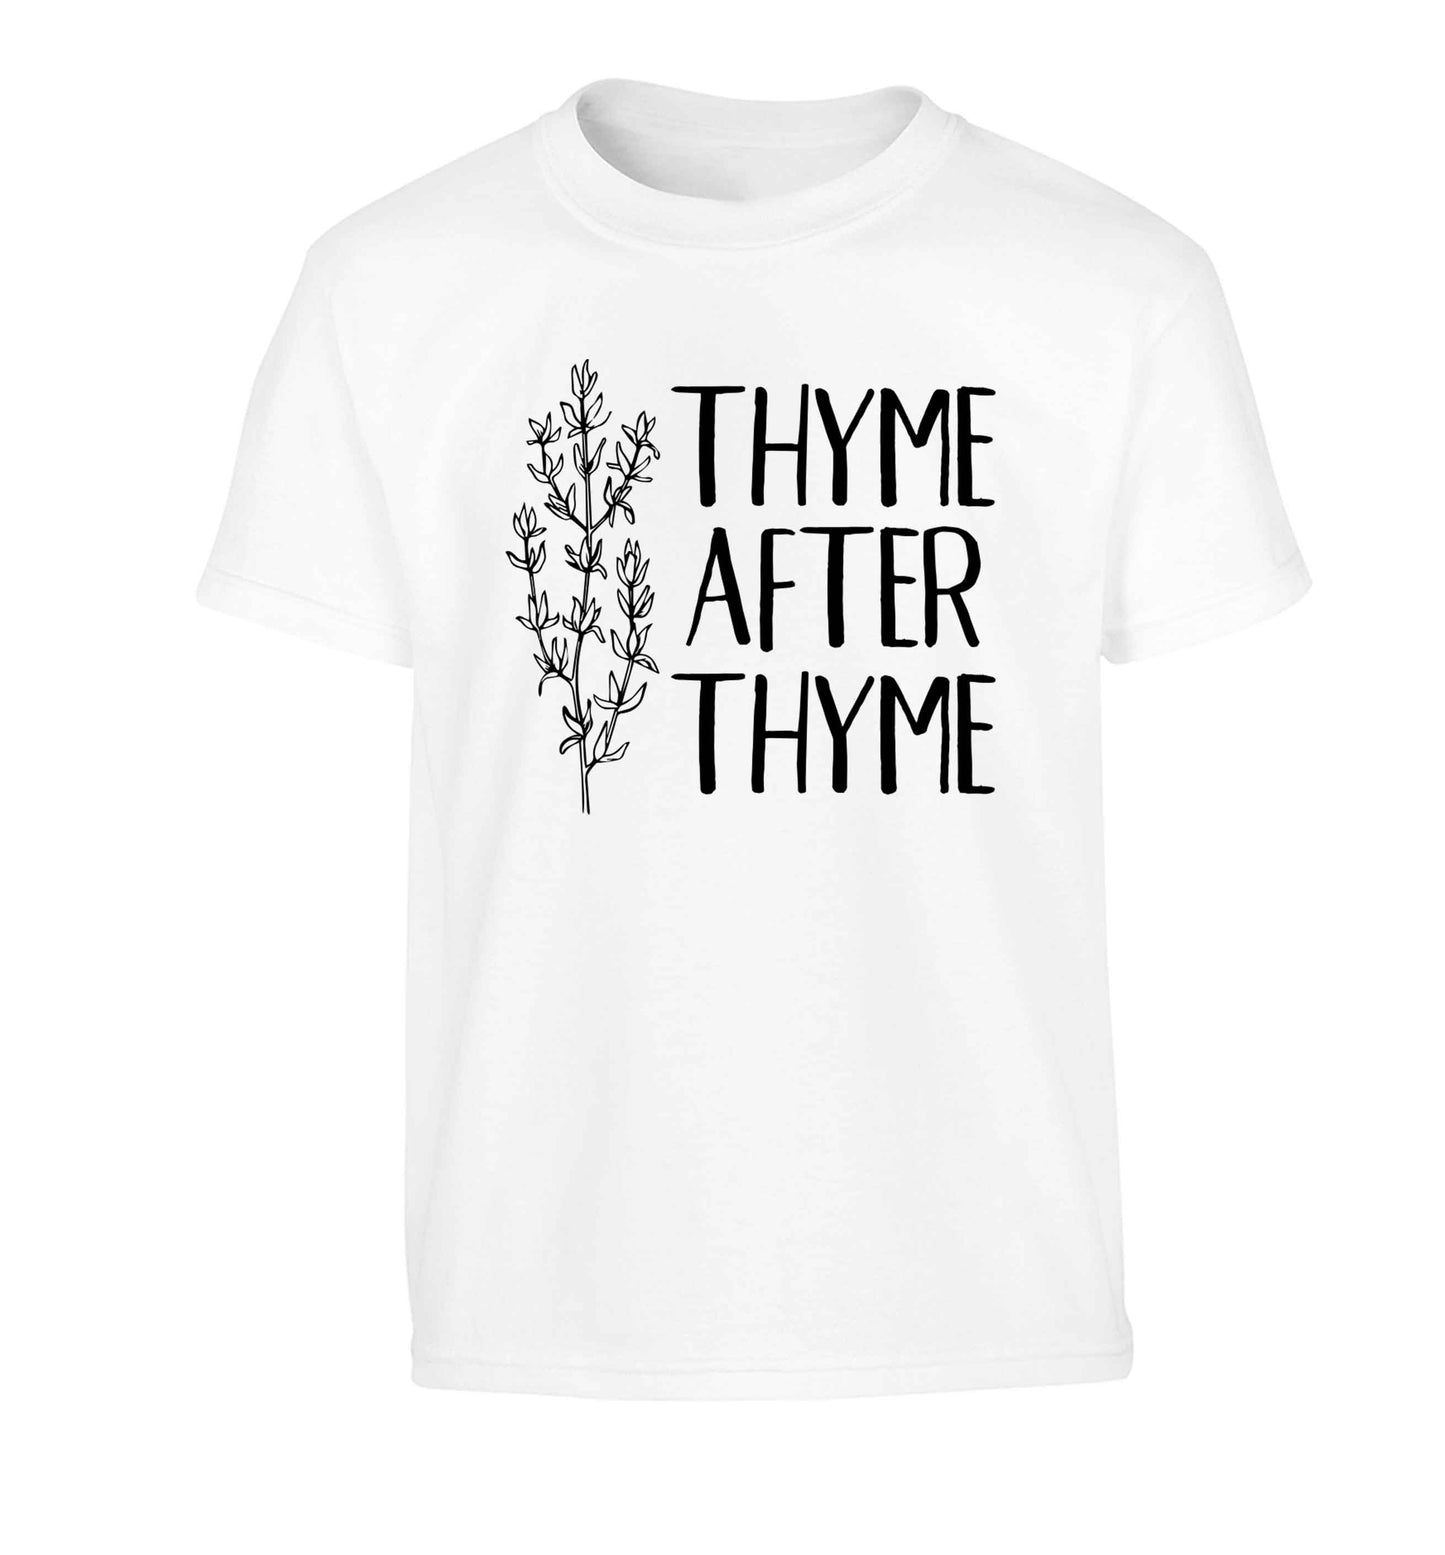 Thyme after thyme Children's white Tshirt 12-13 Years